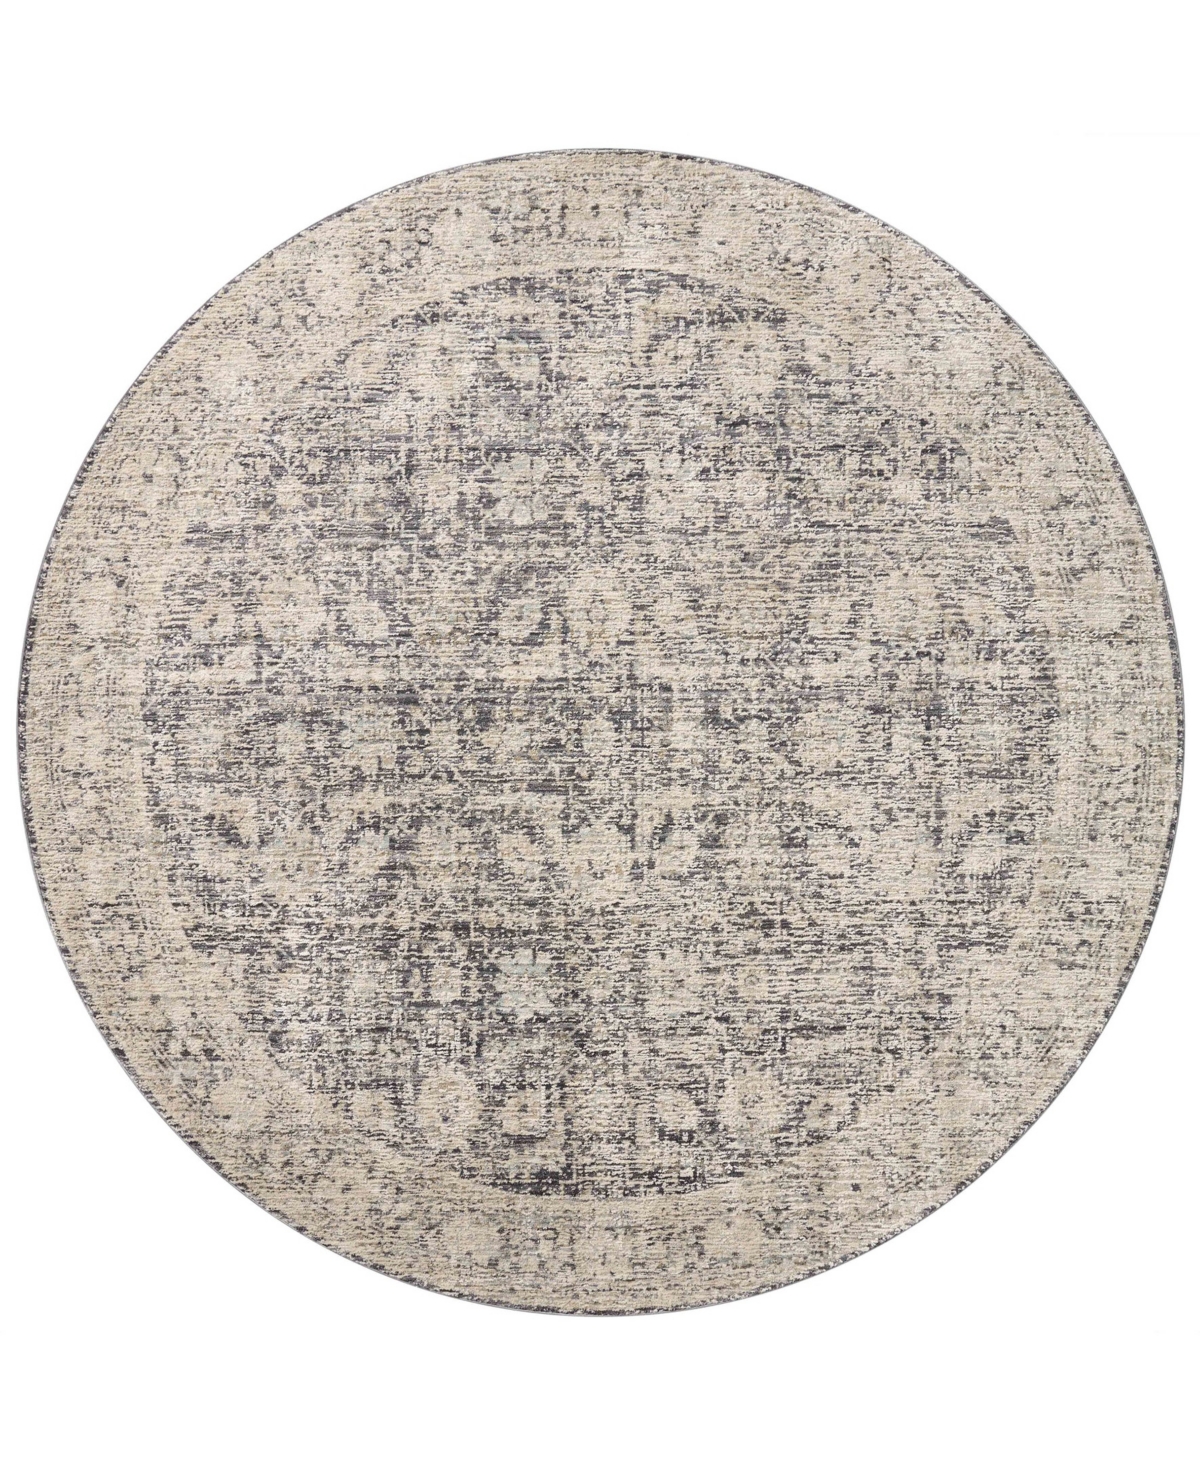 Amber Lewis X Loloi Alie Ale-05 7'10" X 7'10" Round Area Rug In Charcoal